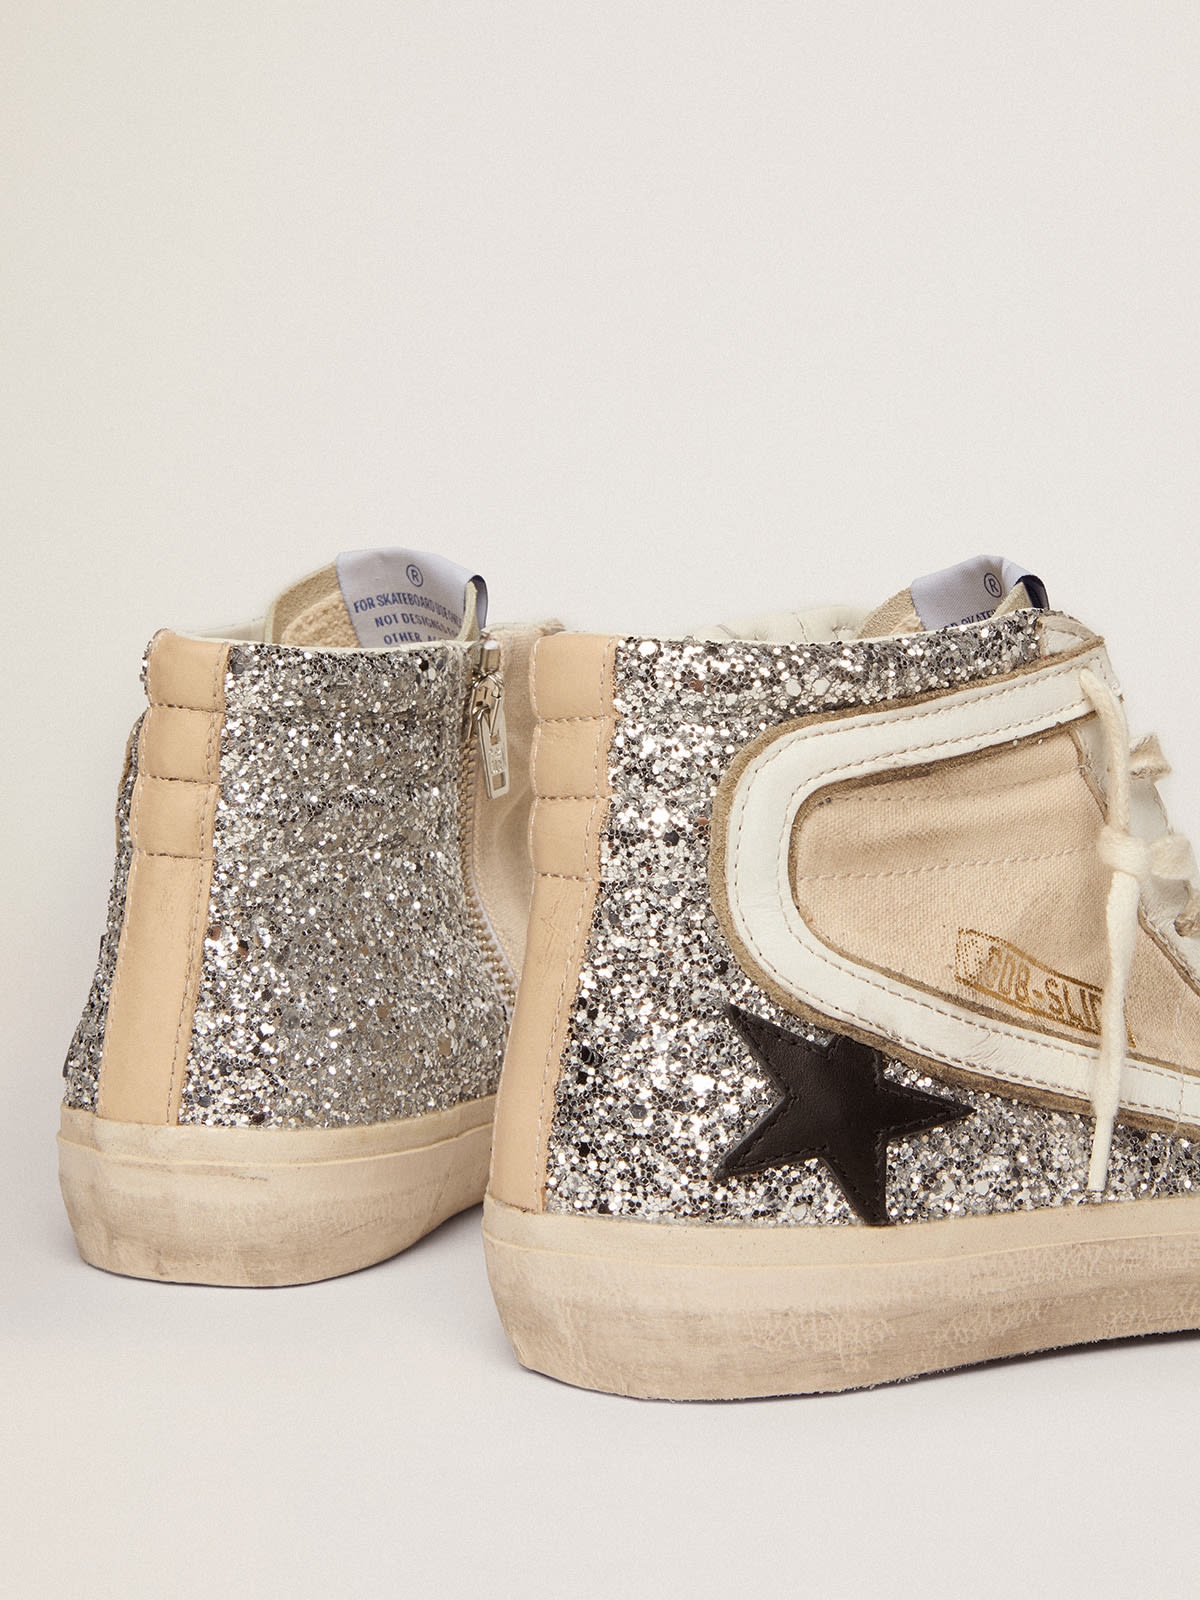 Penstar Slide sneakers in cream-colored canvas and silver glitter with black leather star - 5